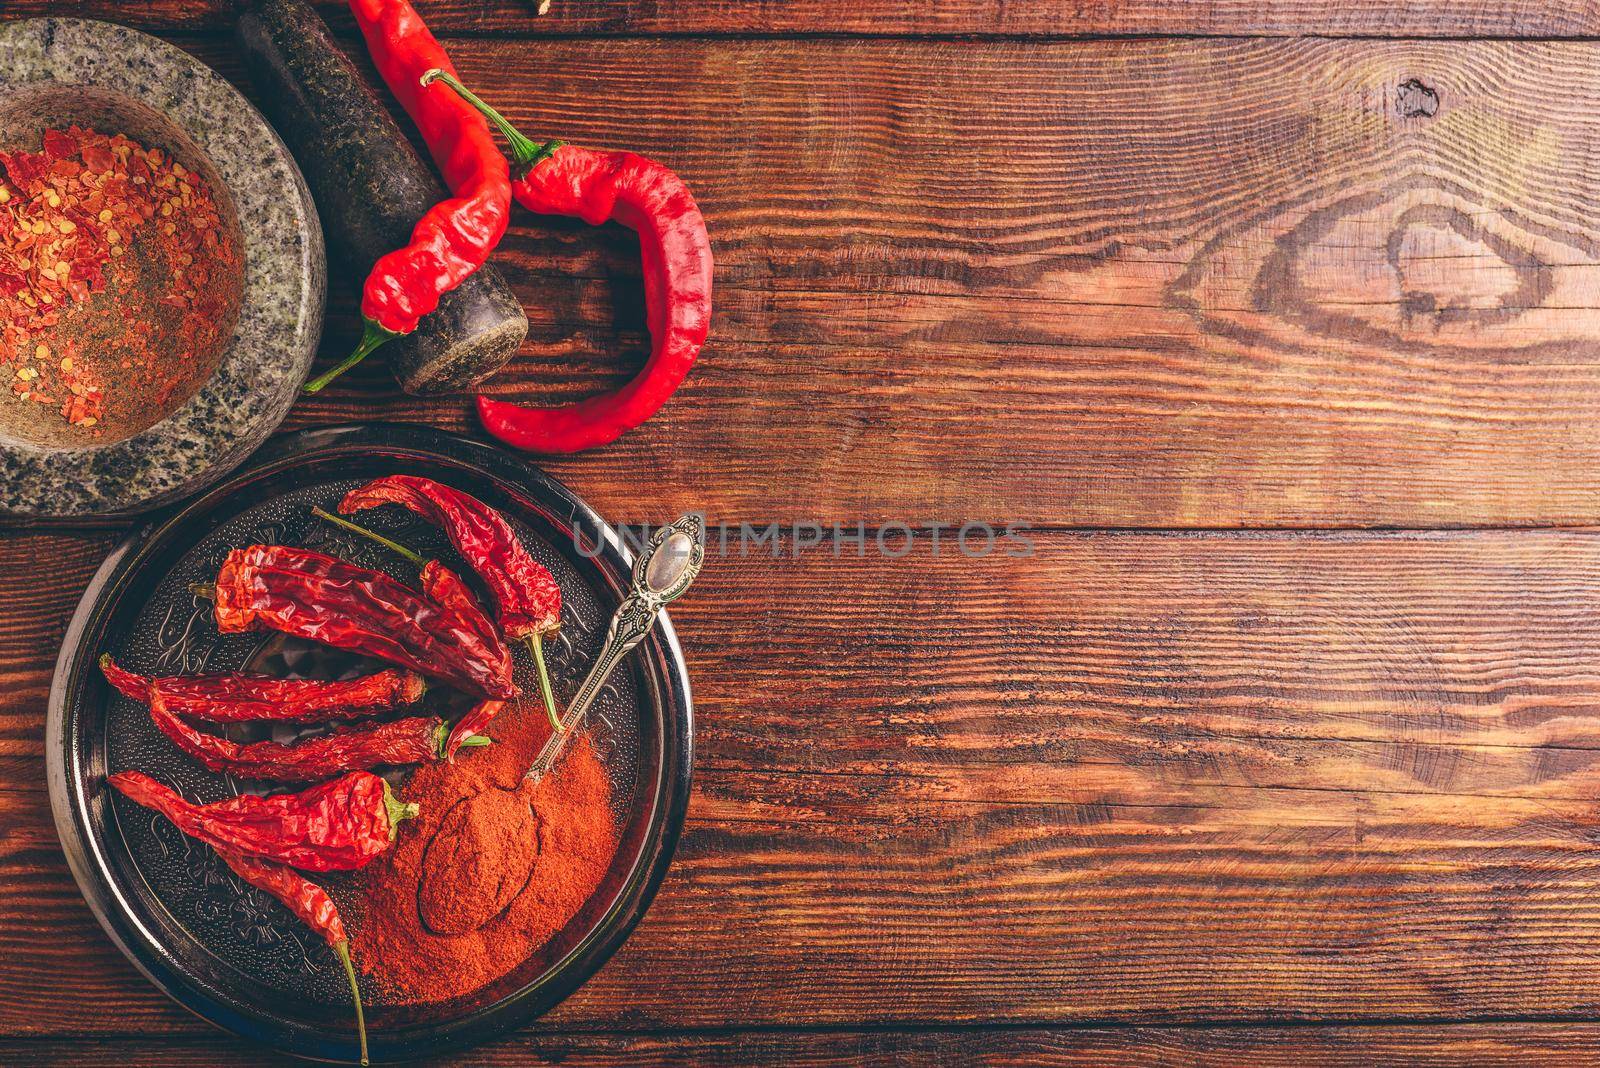 Fresh, dried and ground red chili peppers over wooden surface. Copy space